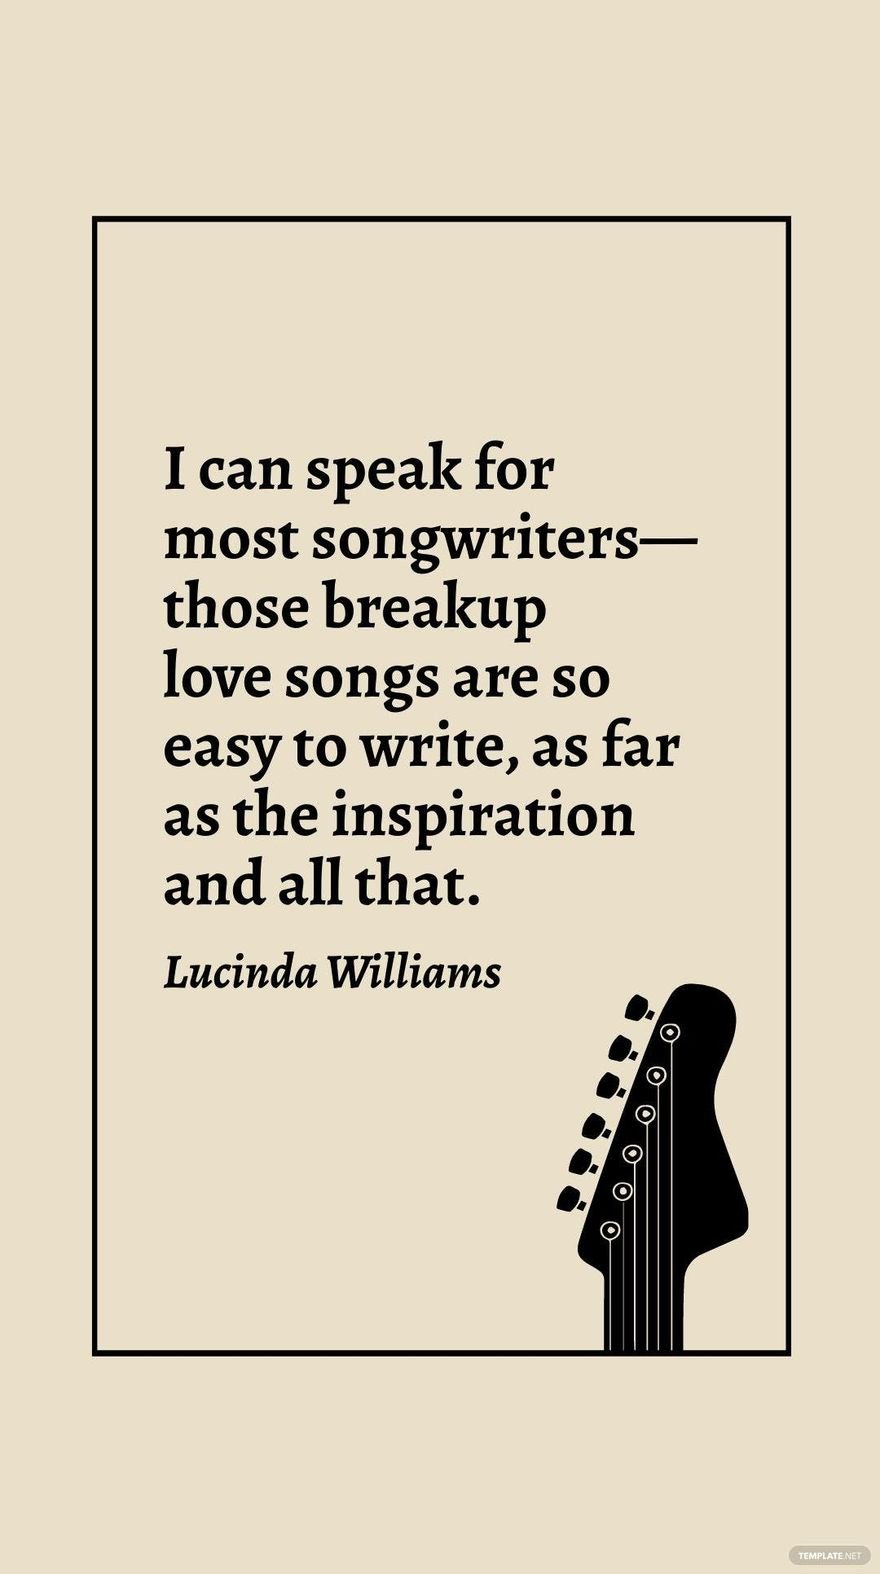 Lucinda Williams - I can speak for most songwriters - those breakup love songs are so easy to write, as far as the inspiration and all that.